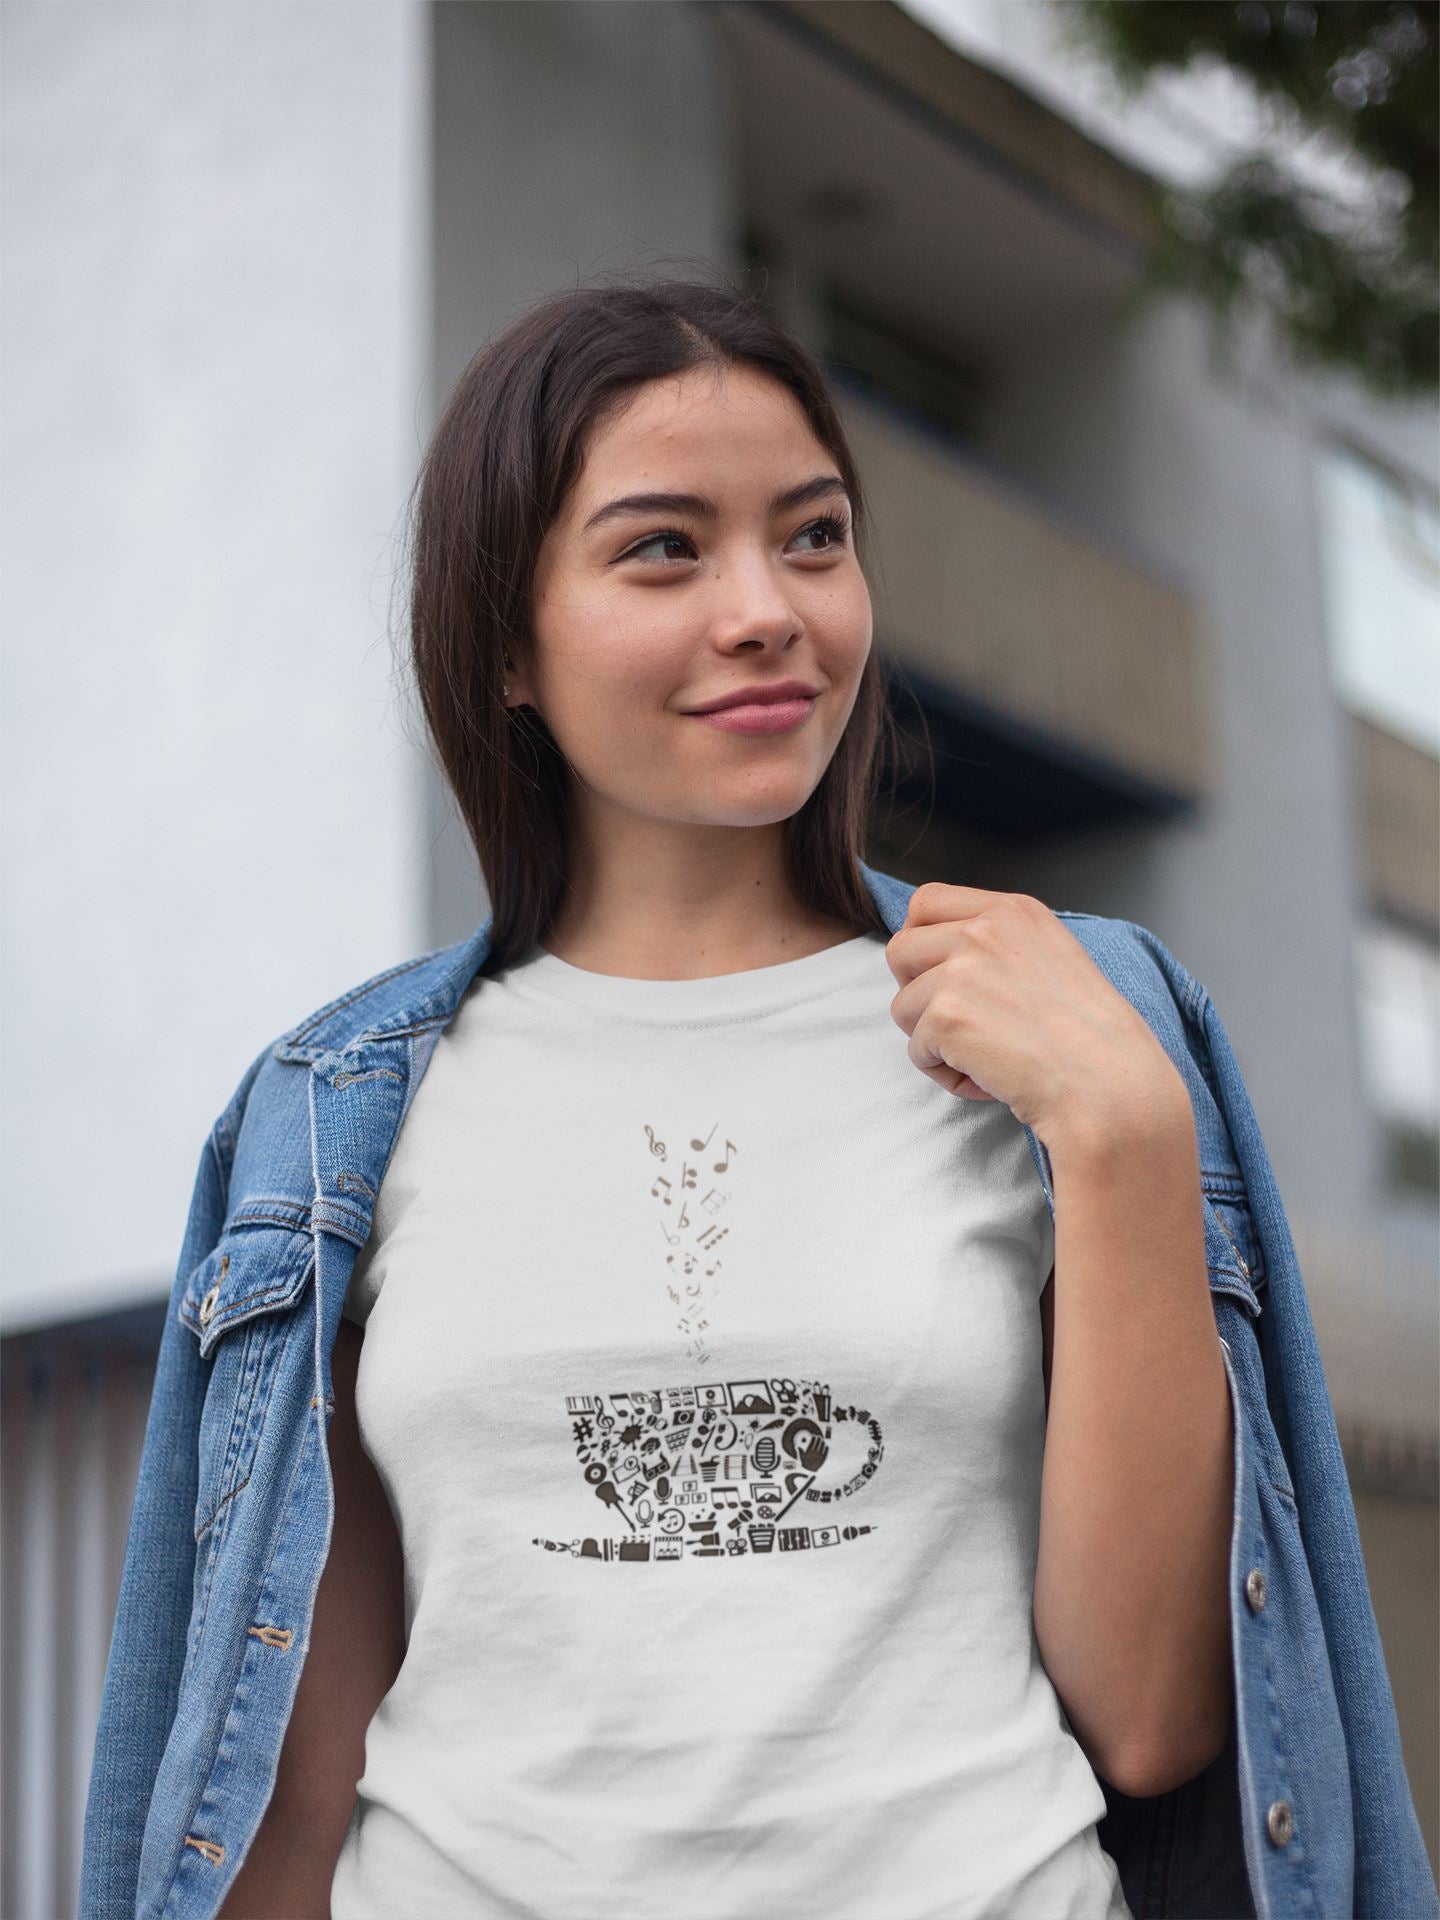 A Cup of Chai Full of Music Supreme White T Shirt for Men and Women freeshipping - Catch My Drift India